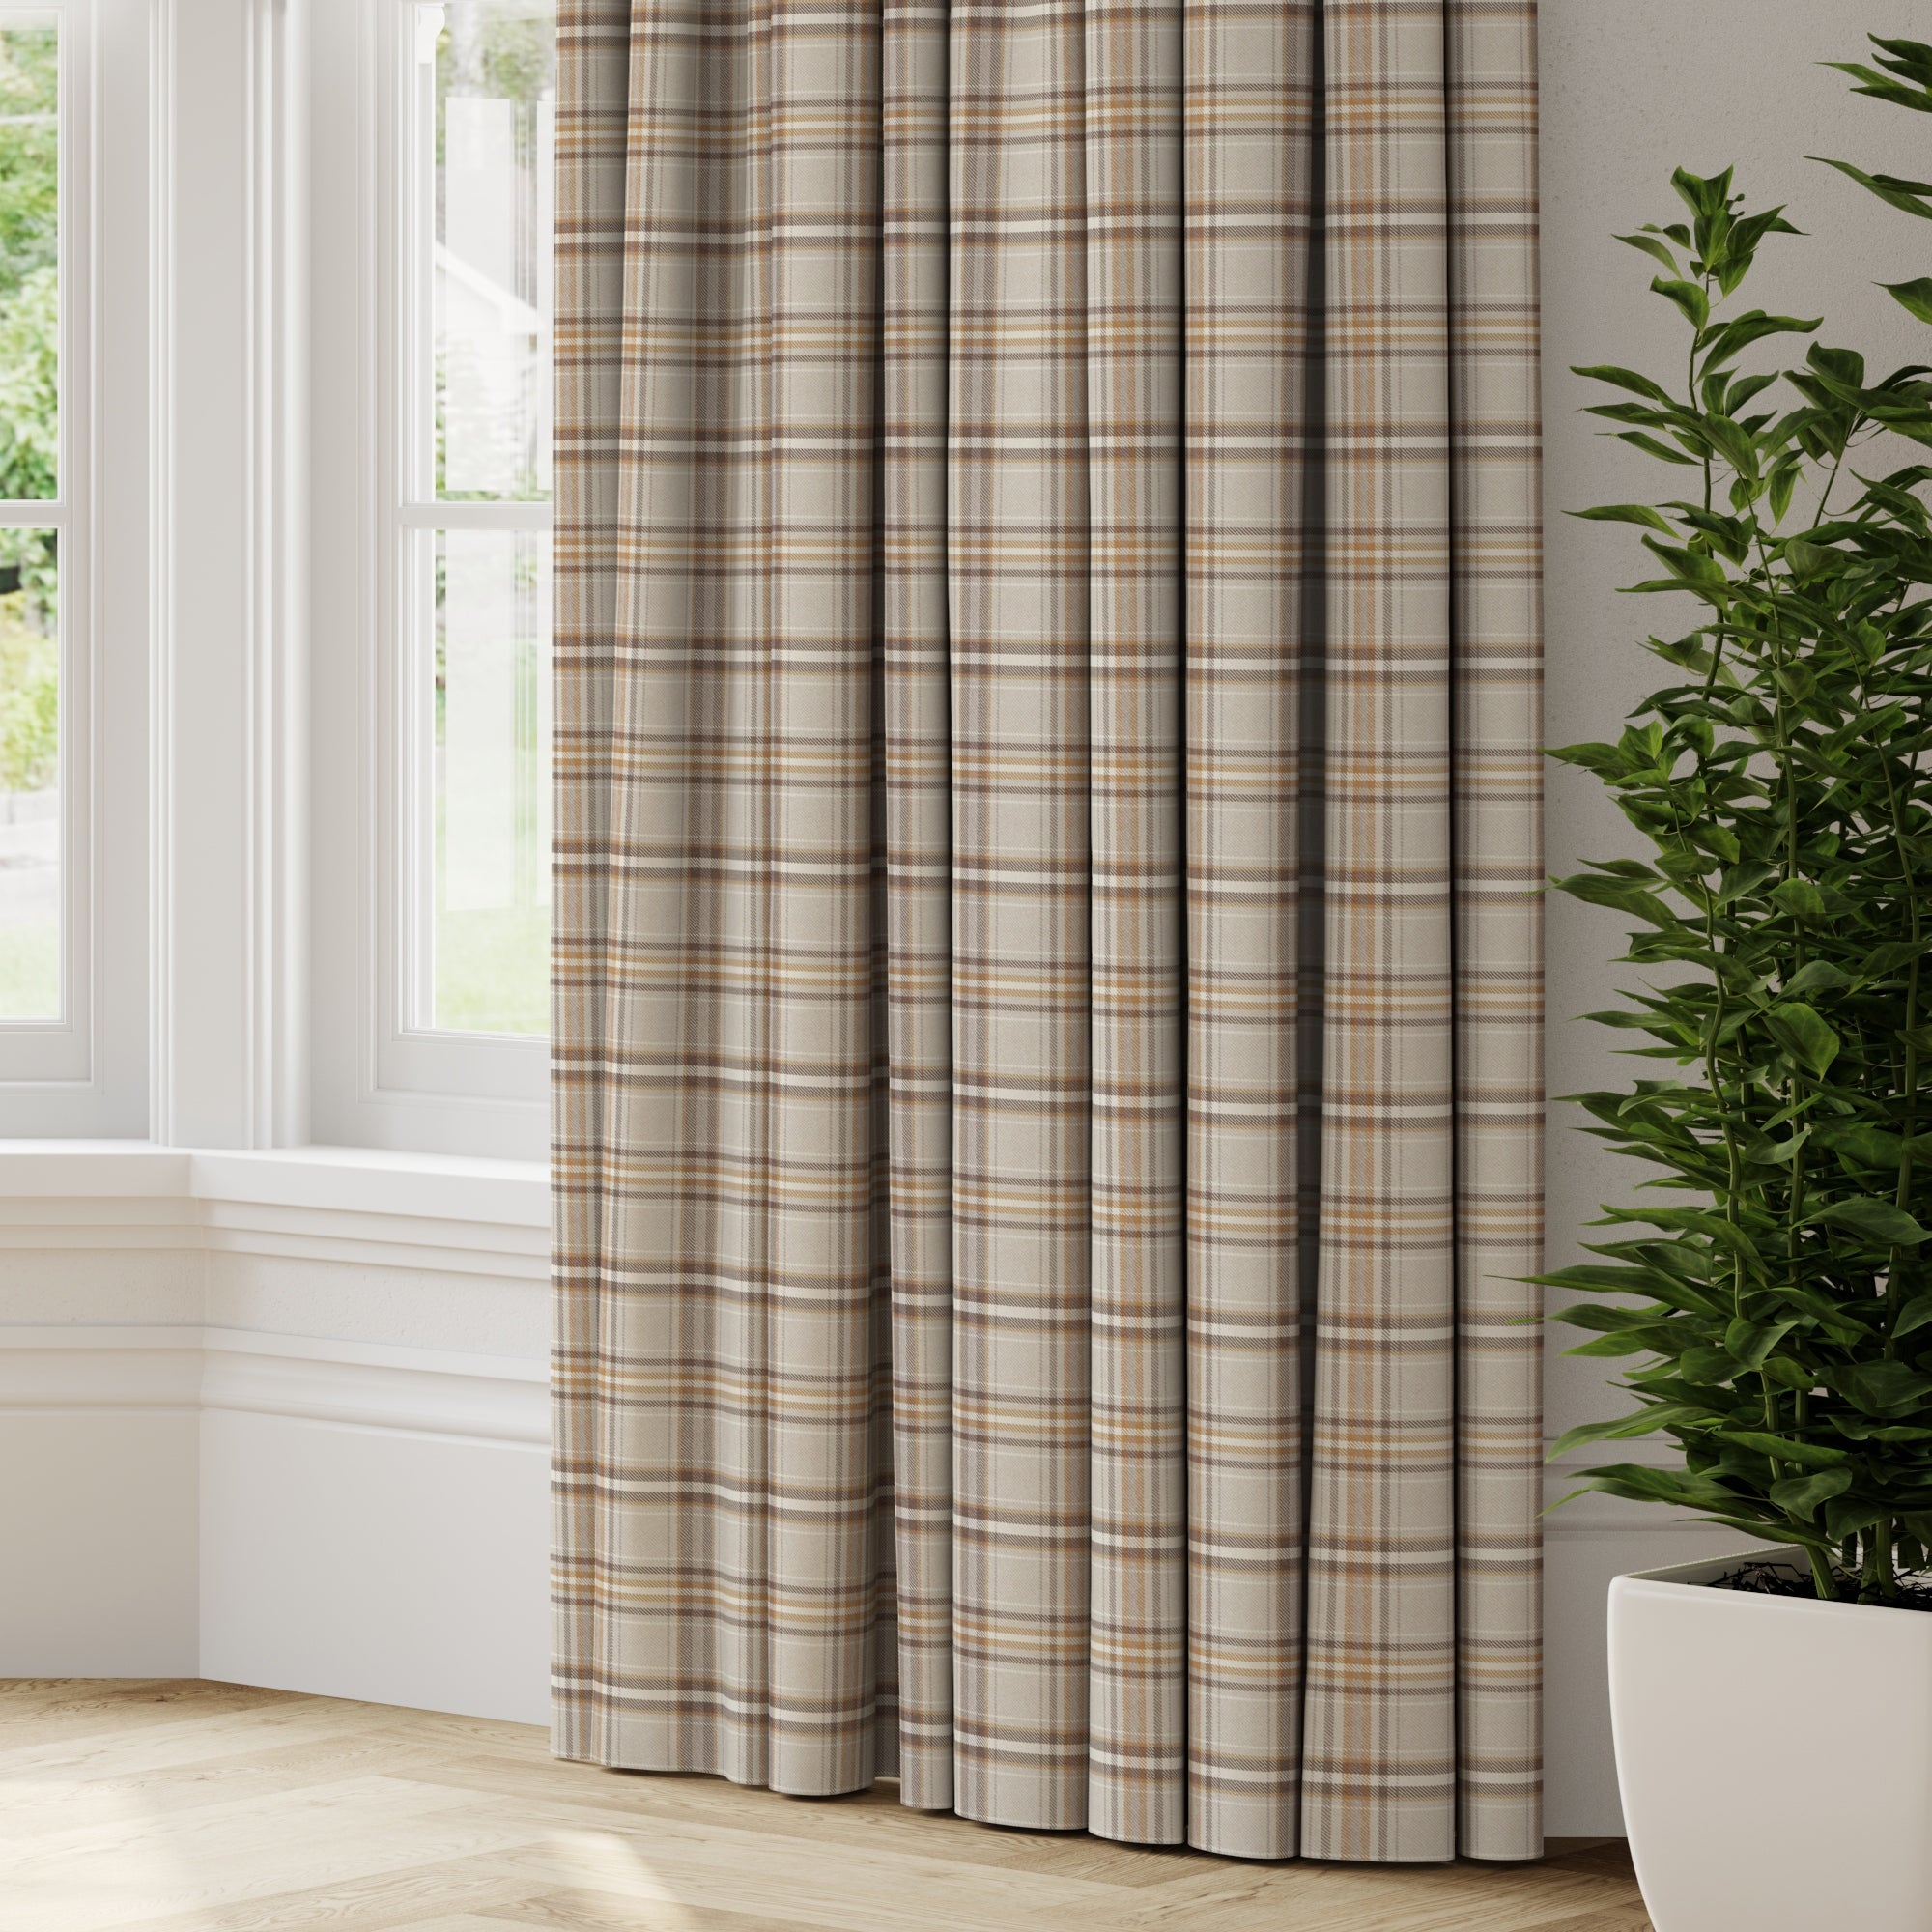 Esk Made to Measure Fire Retardant Curtains White/Brown